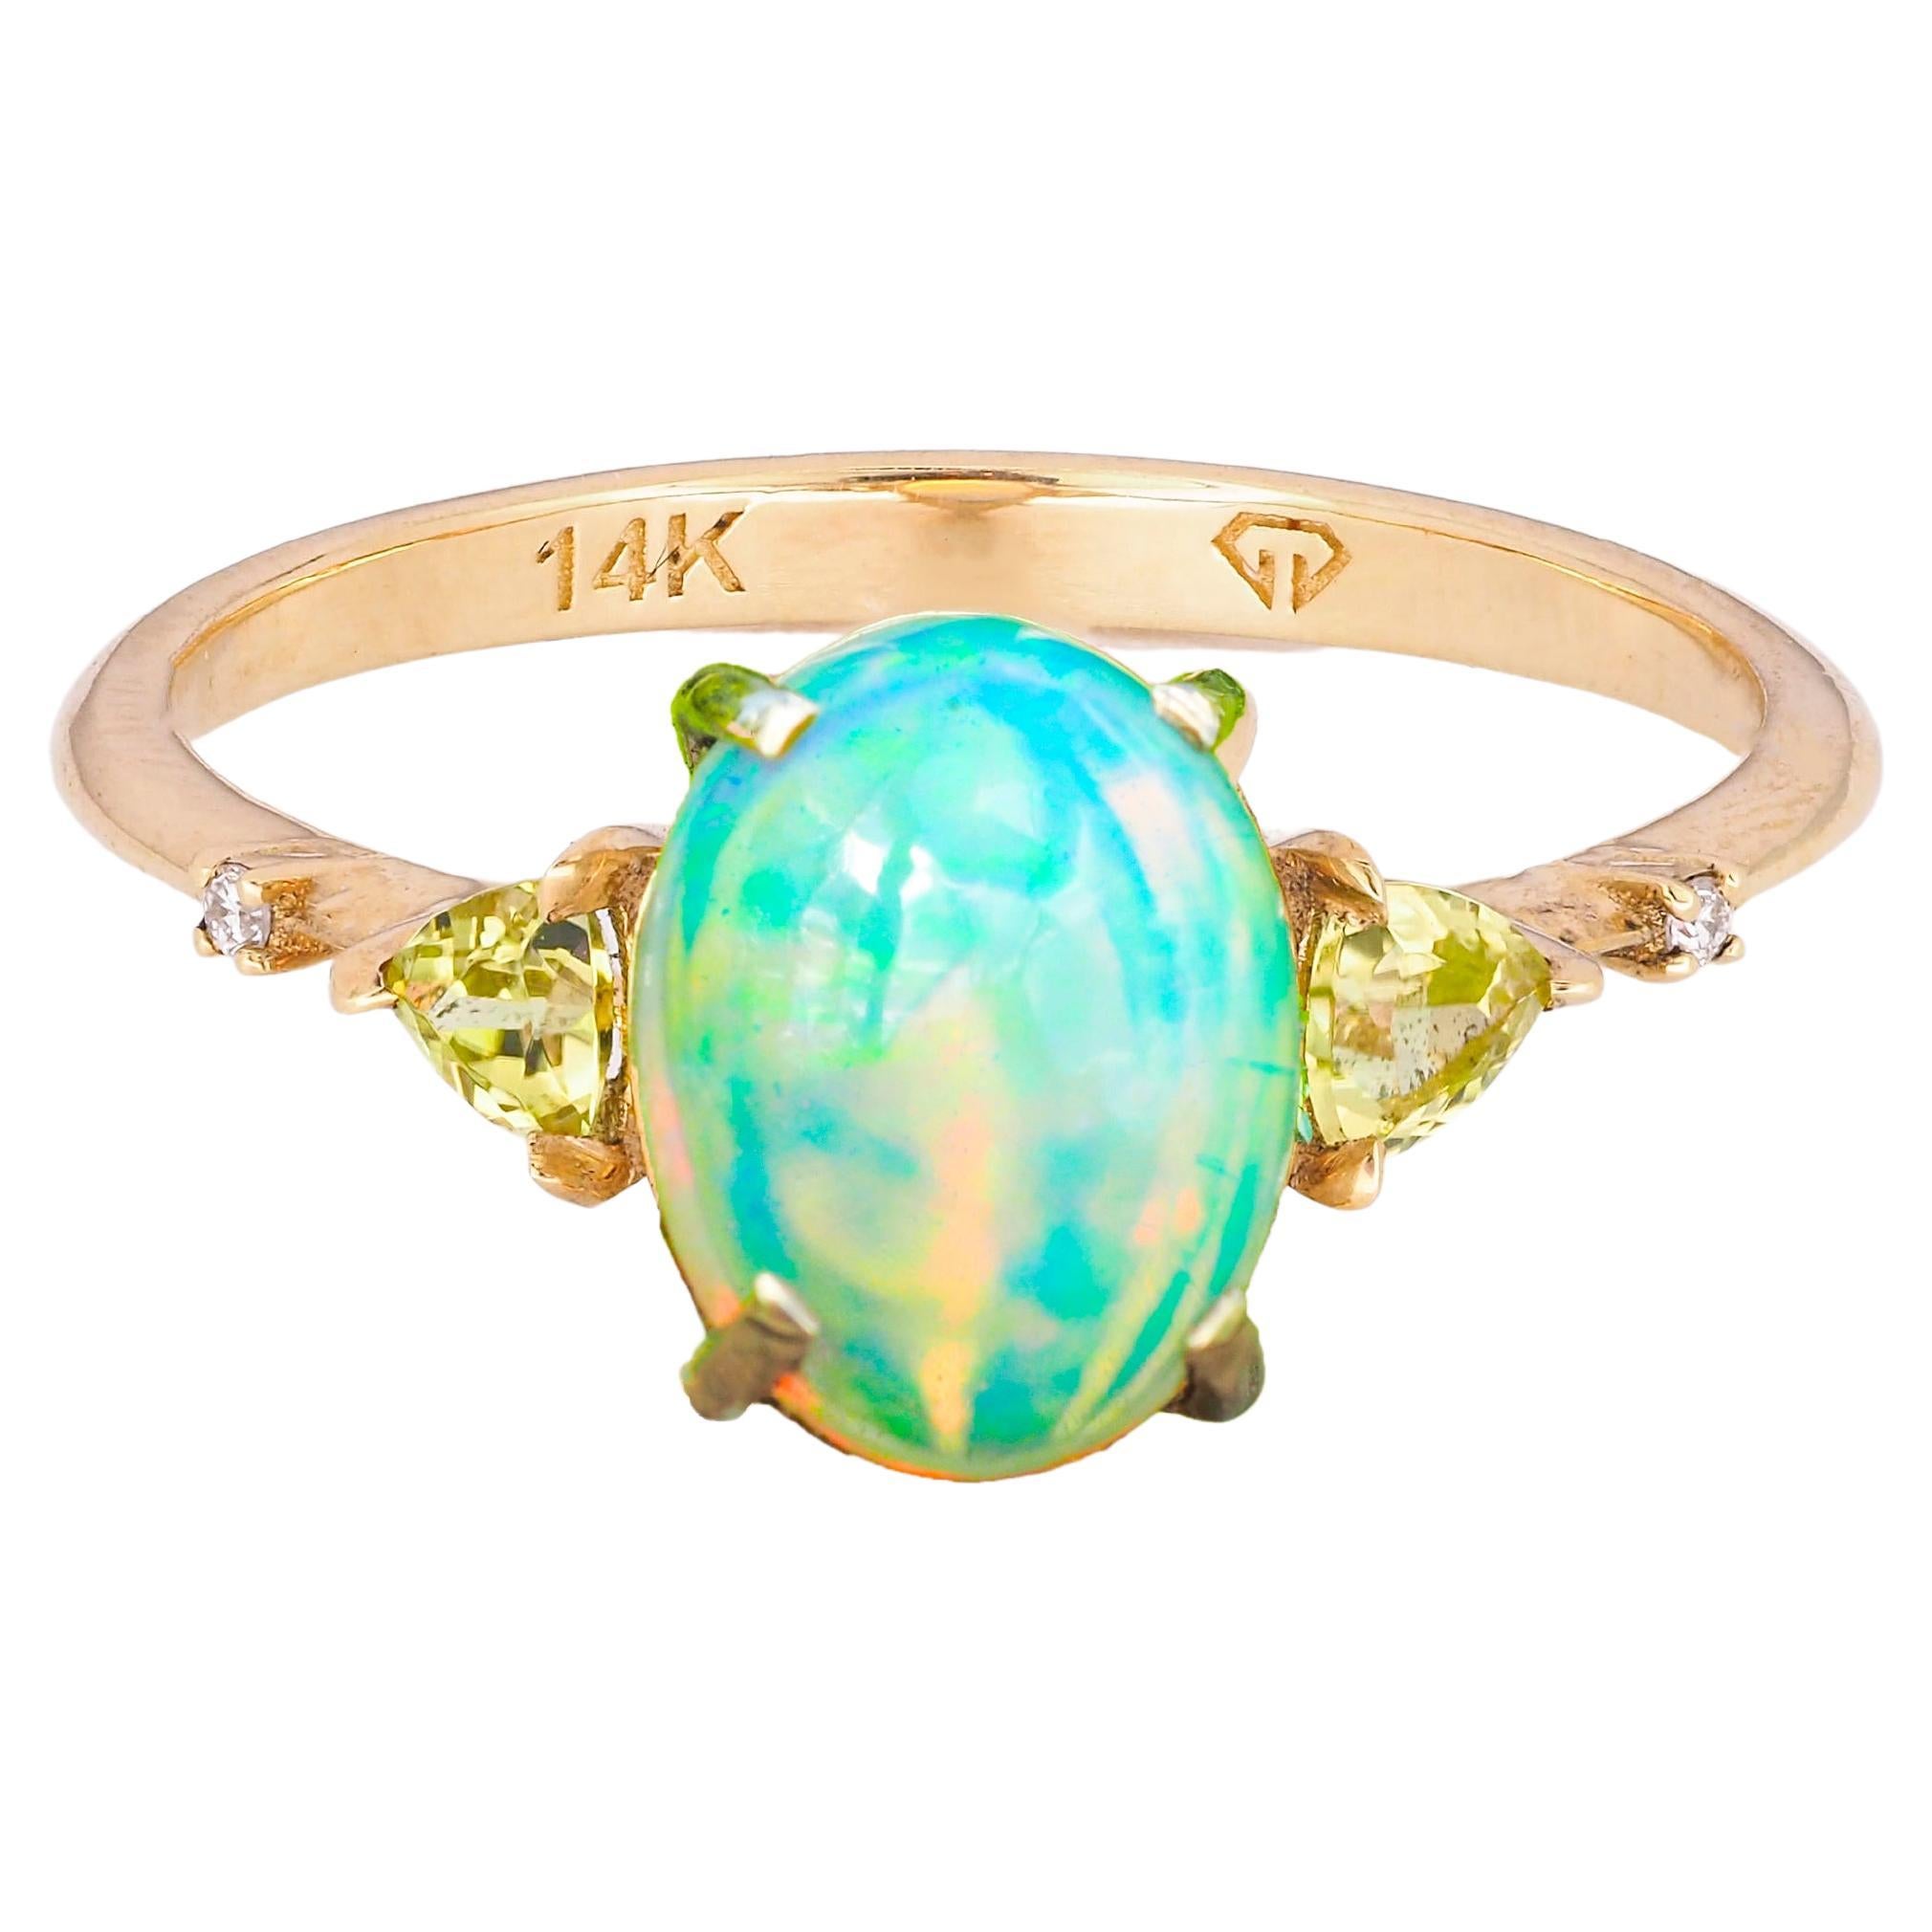 14k Gold Ring with Opal, Diamonds and Peridots